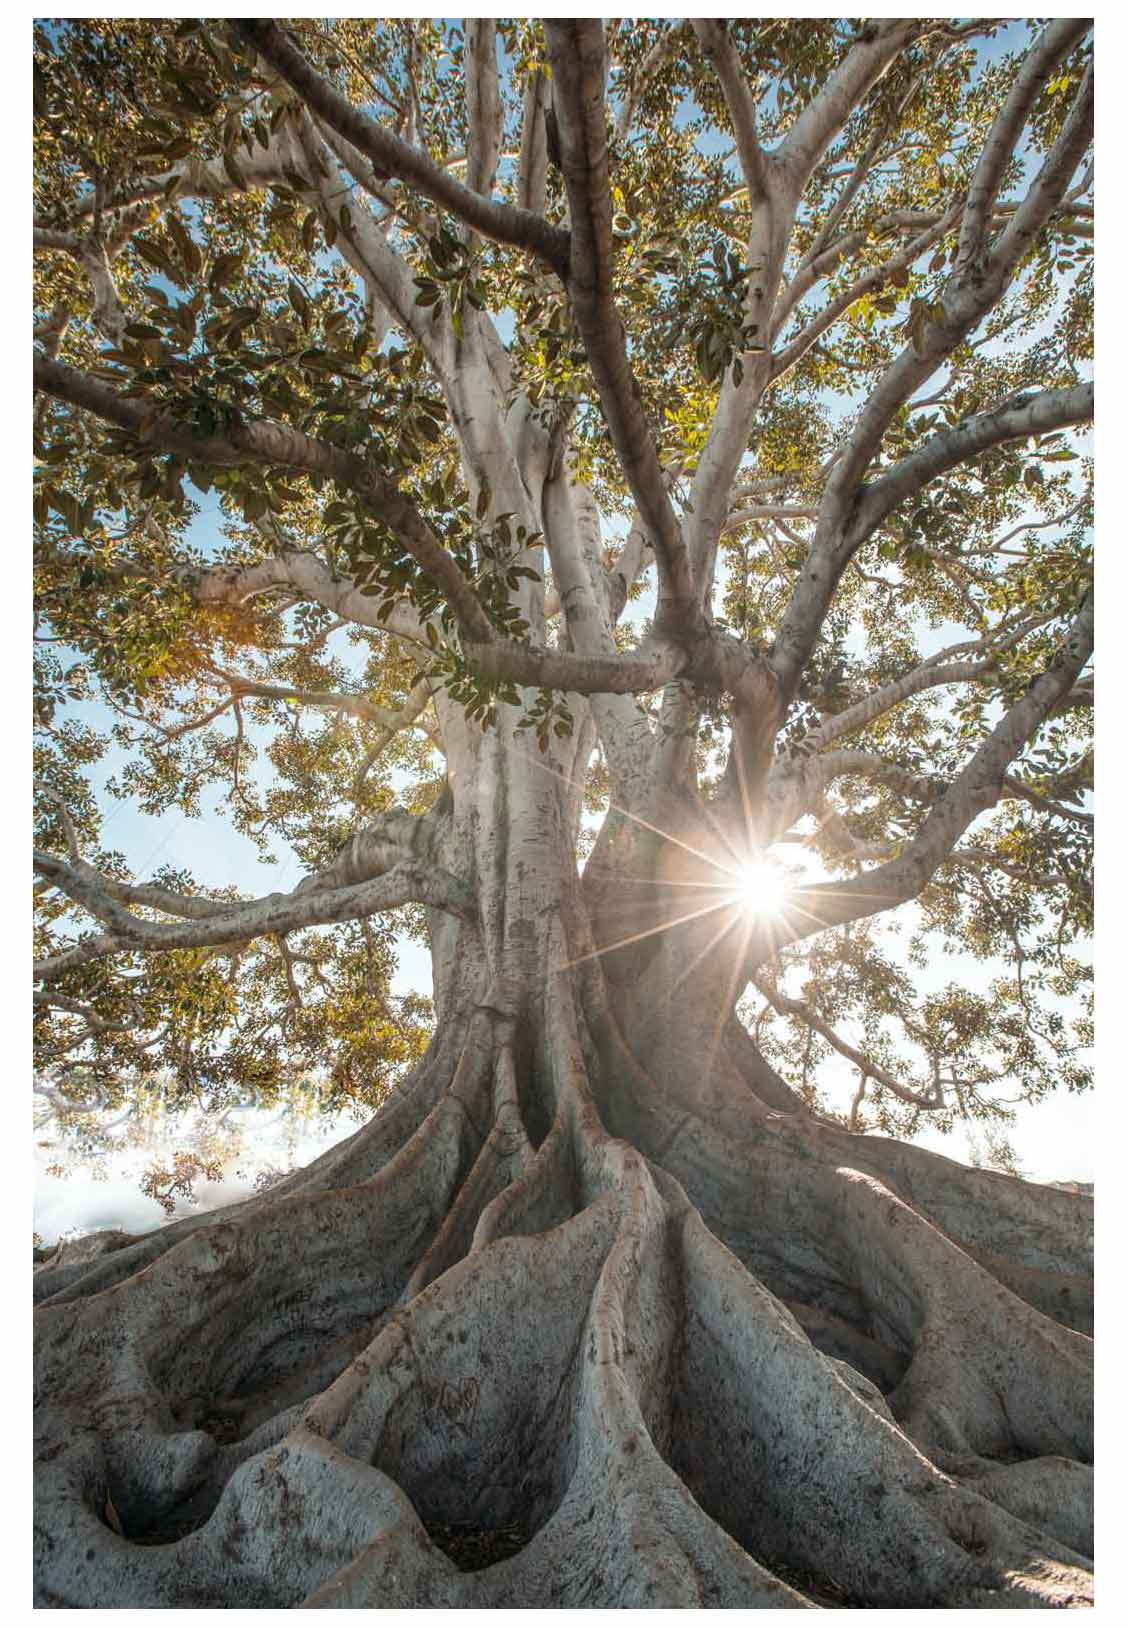 Sun shining through unique tree with exposed root system 